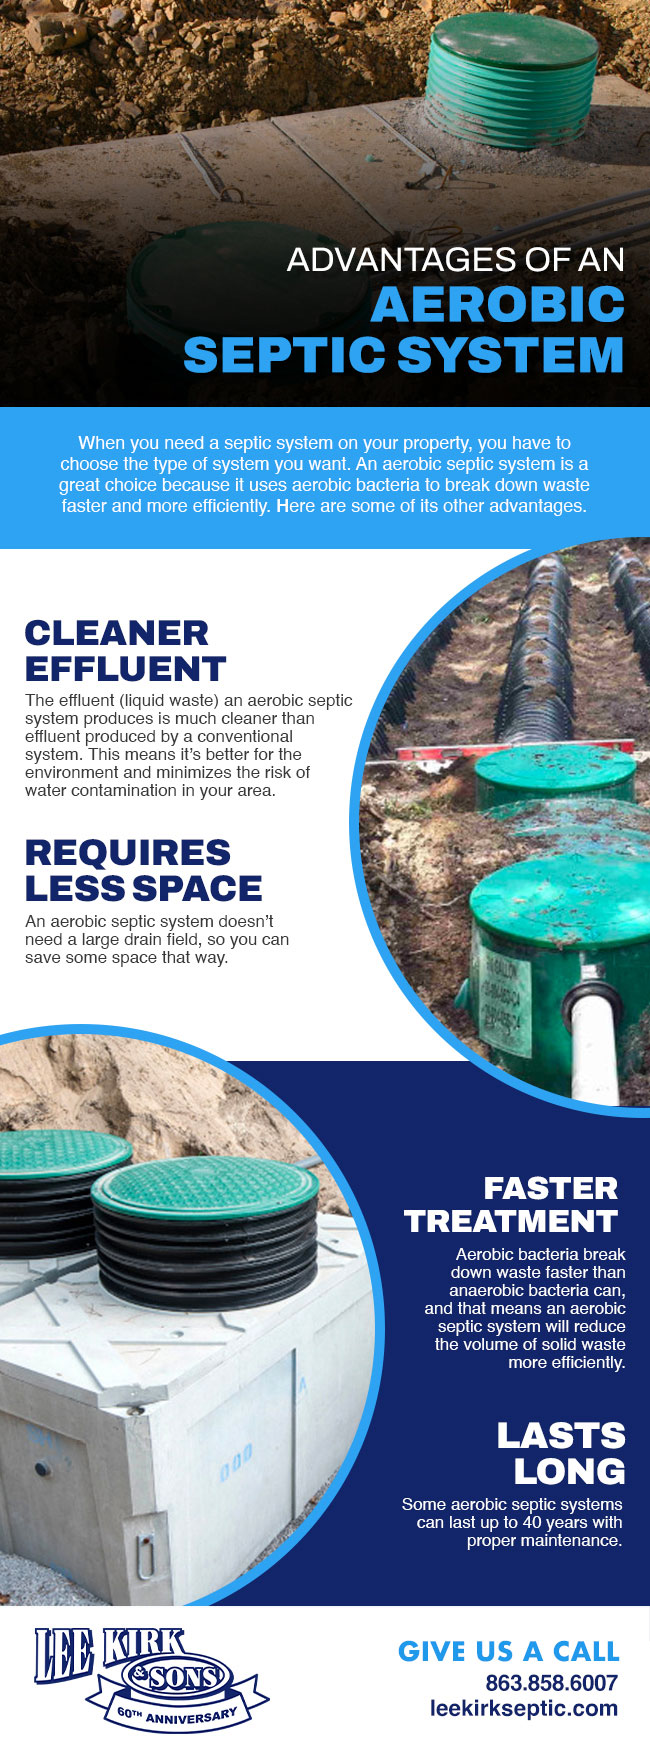 Should You Consider an Aerobic Septic System? 